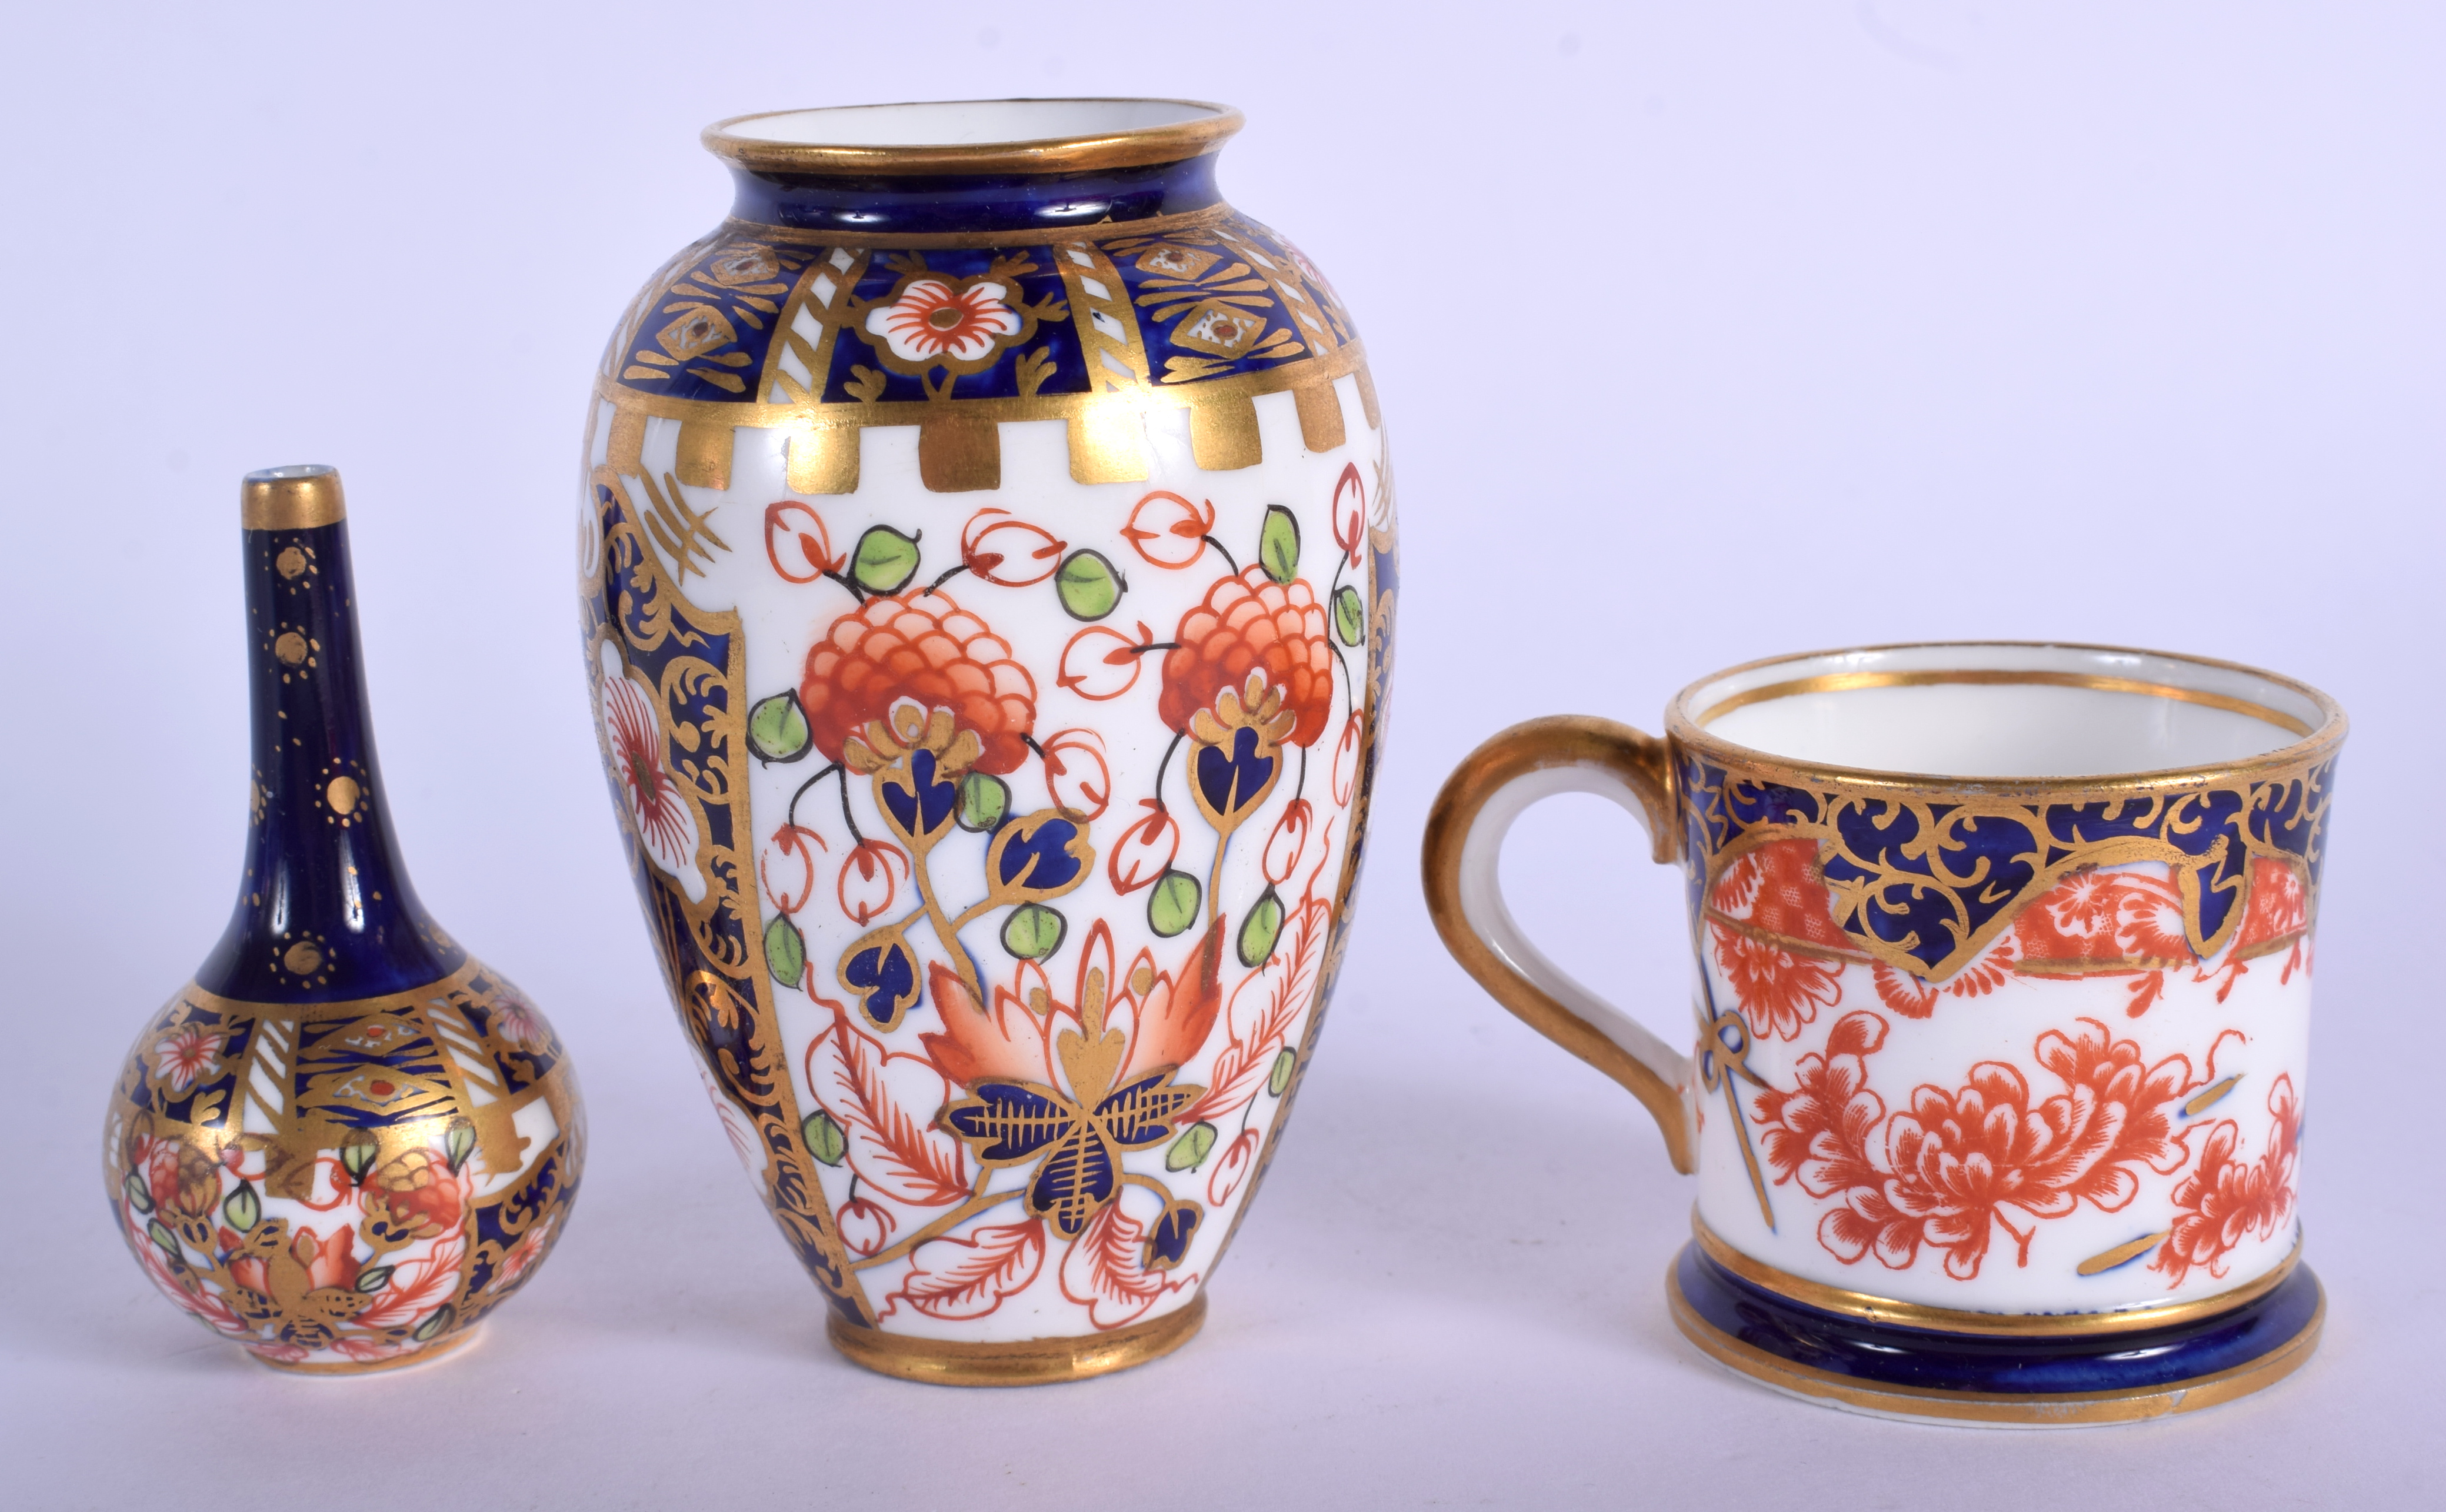 Royal Crown Derby imari pattern 6299 small vase, a bottle vase in the same pattern and a 26469 minia - Image 2 of 3